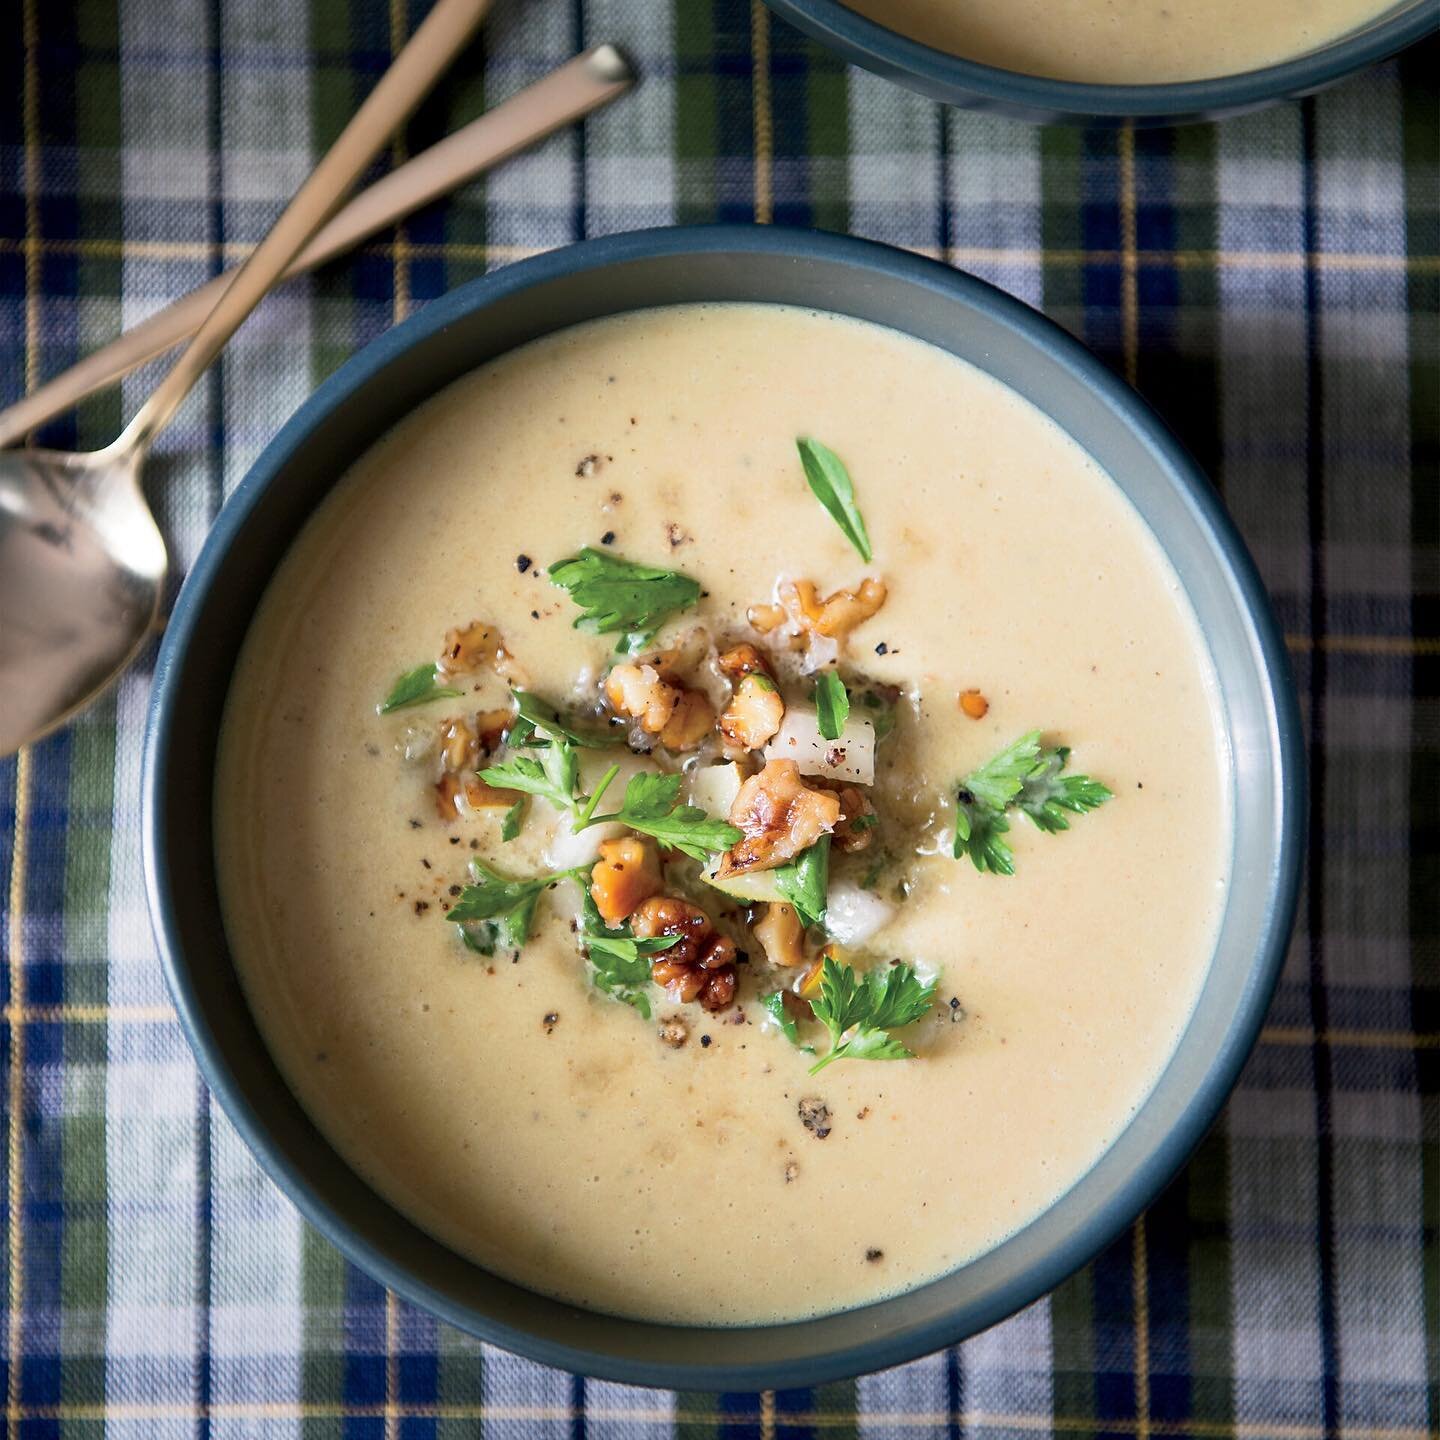 It's been a bit rainy and cool in NYC this week so I made this Creamy Parsnip Soup with Apple and Walnuts for the fam. Nothing better on a stormy day! Click the link in my bio for the recipe.